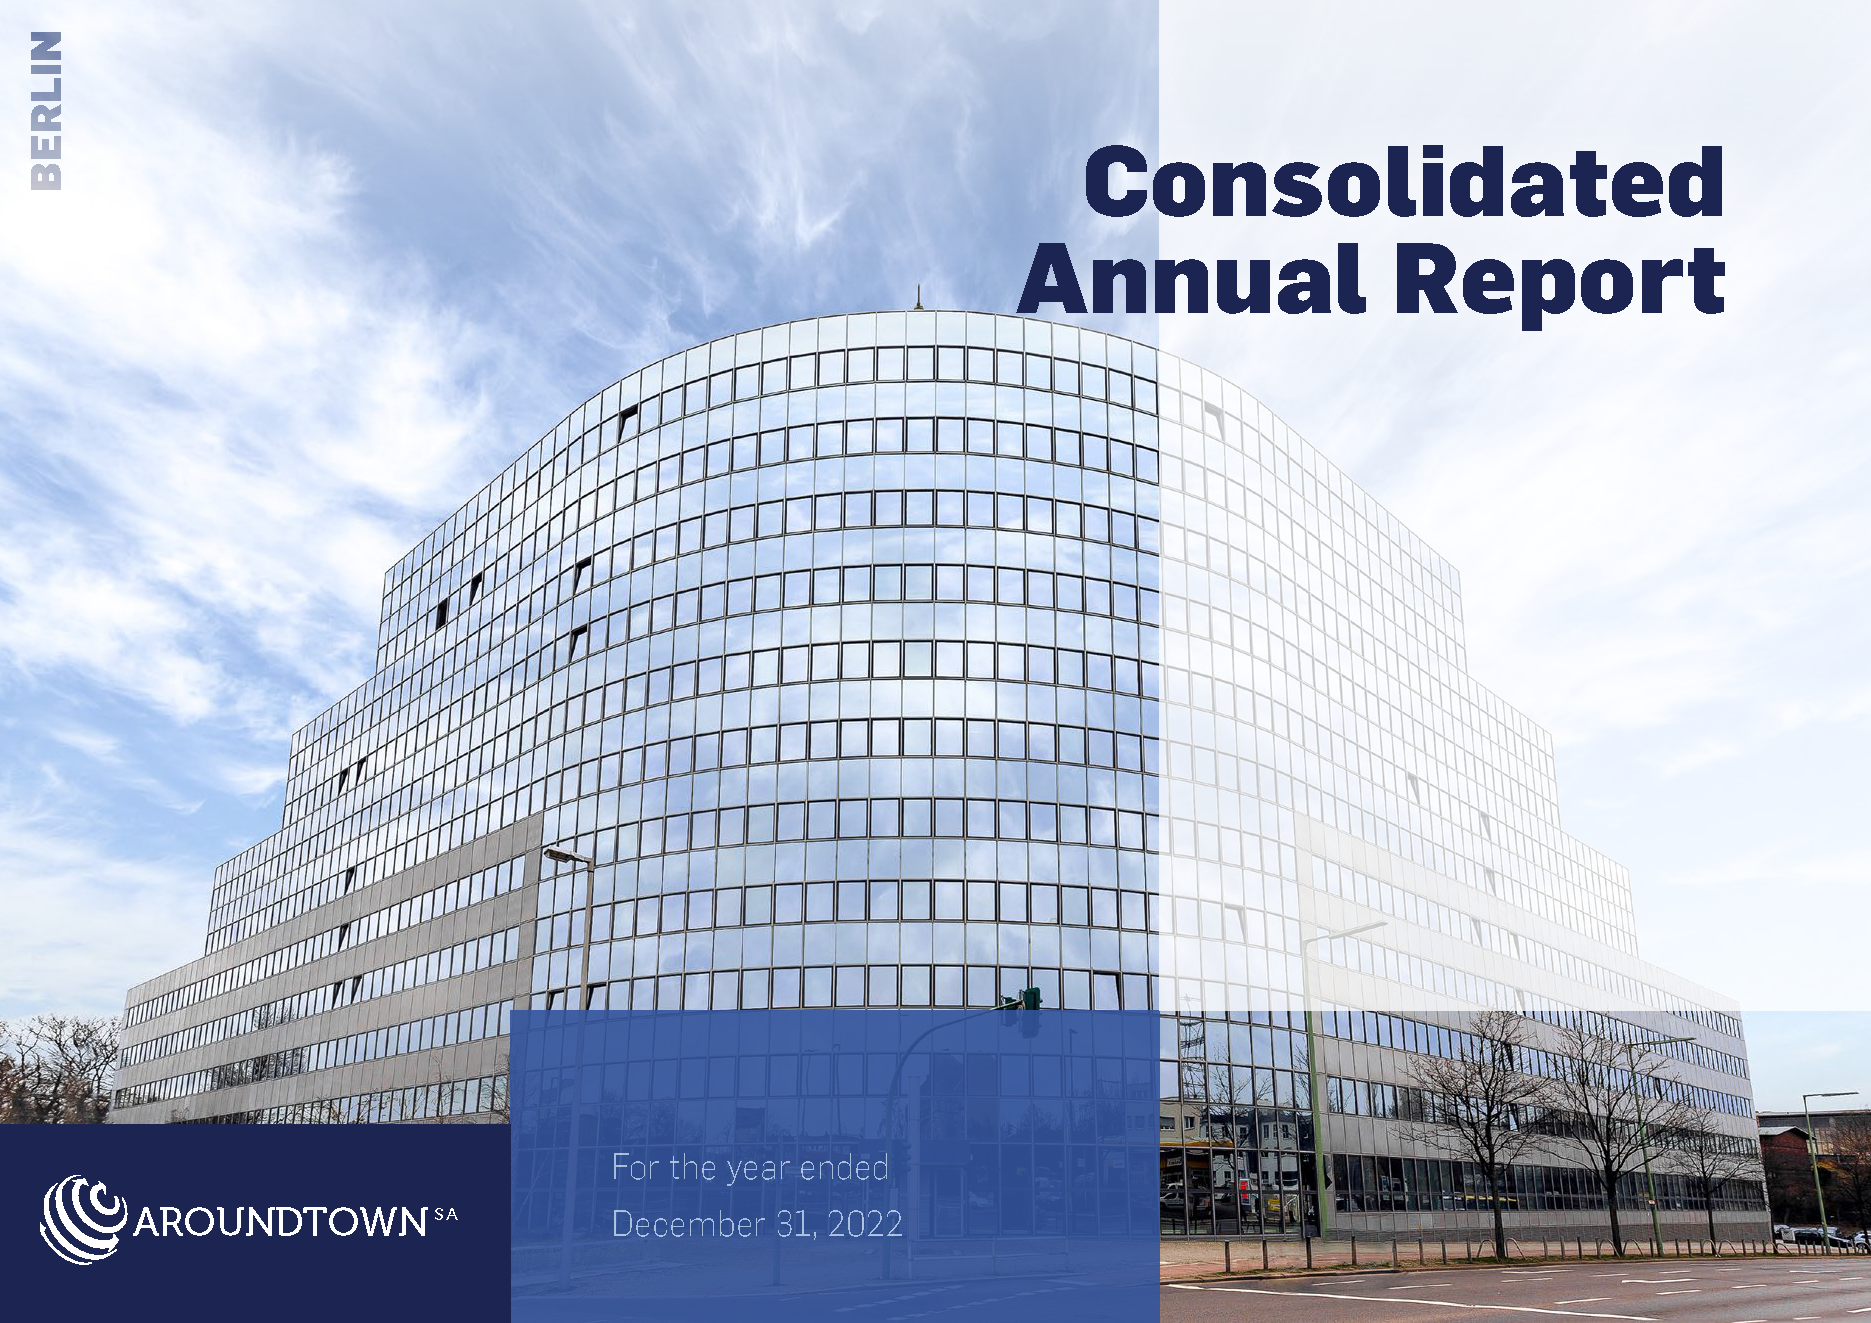 FY 2022 Consolidated Annual Report